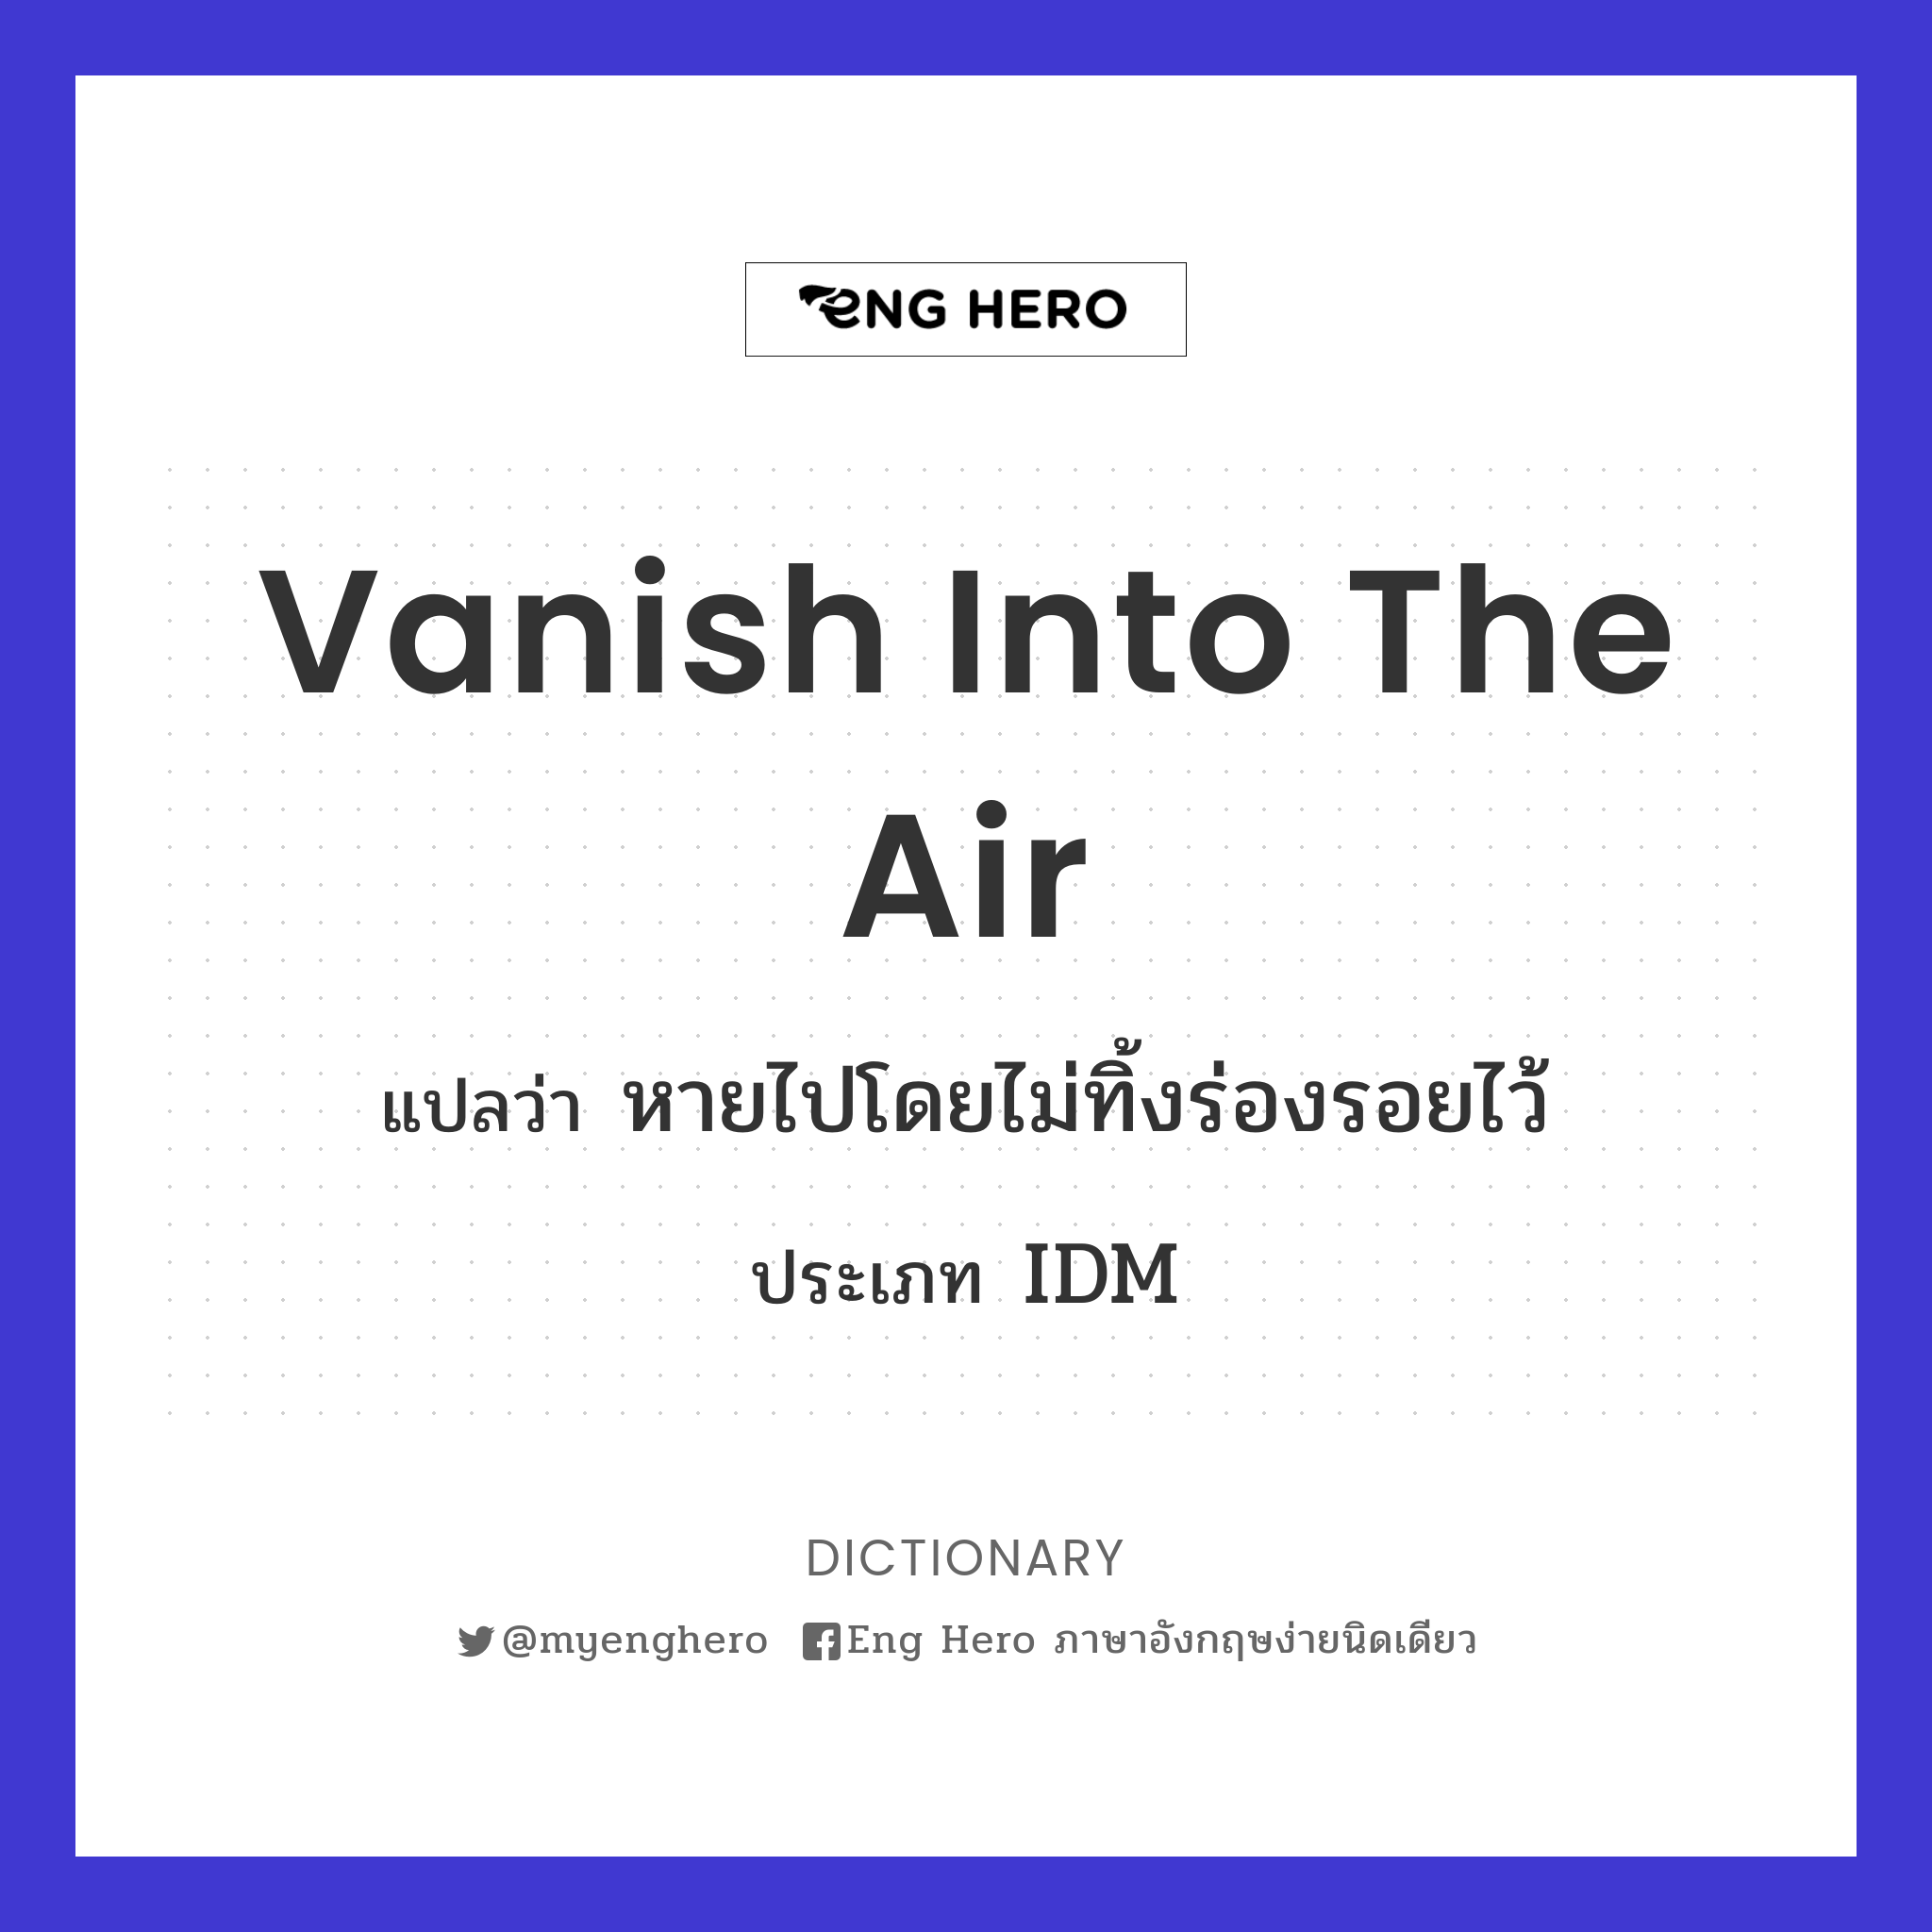 vanish into the air